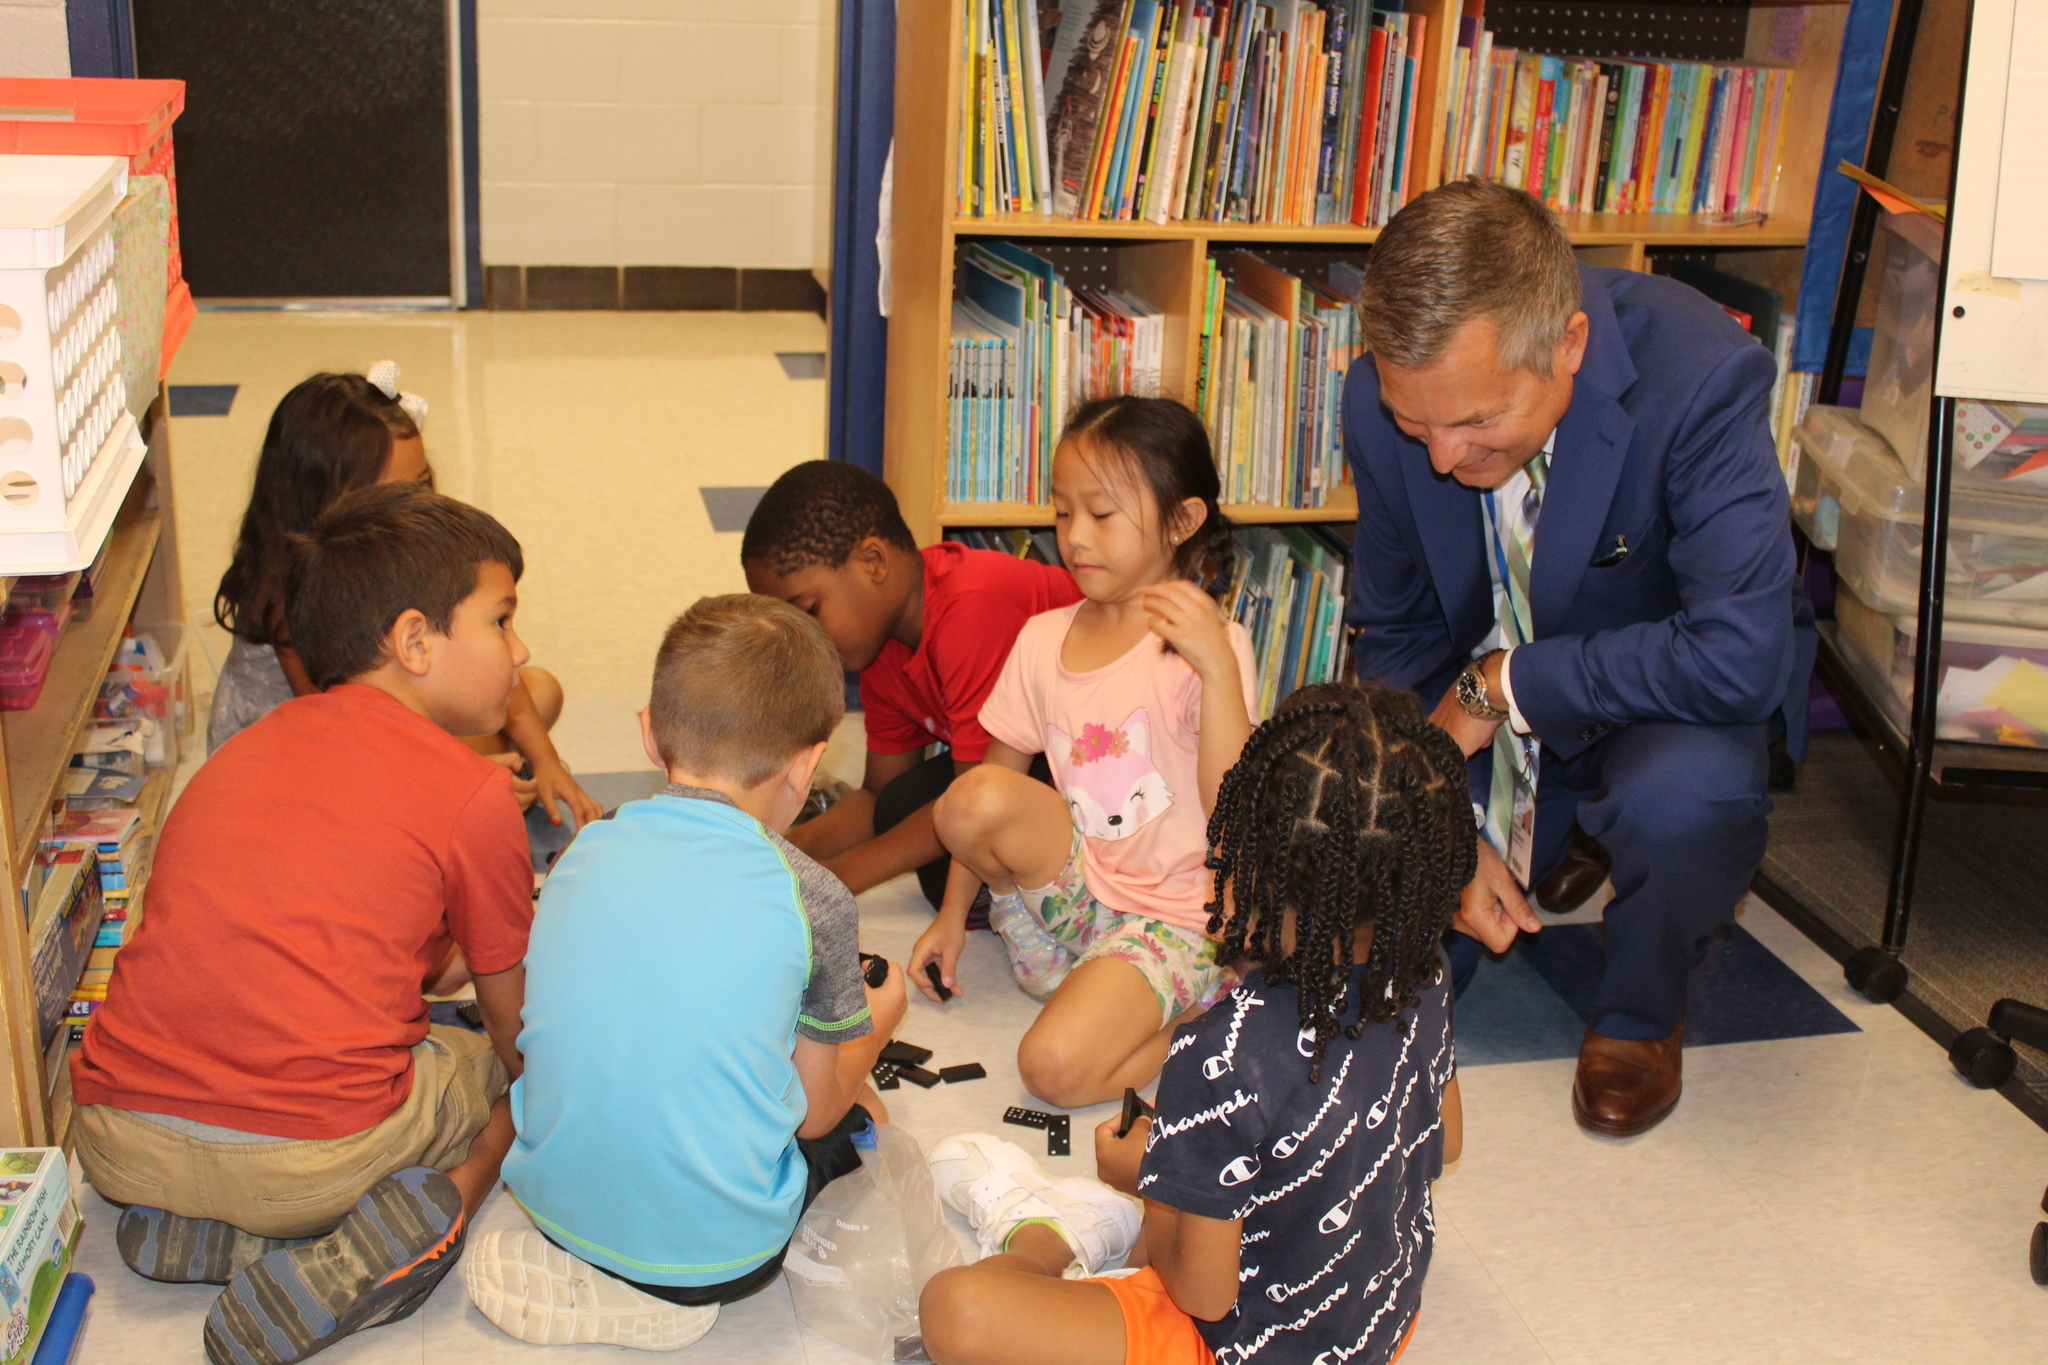 Superintendent with Students, Reading